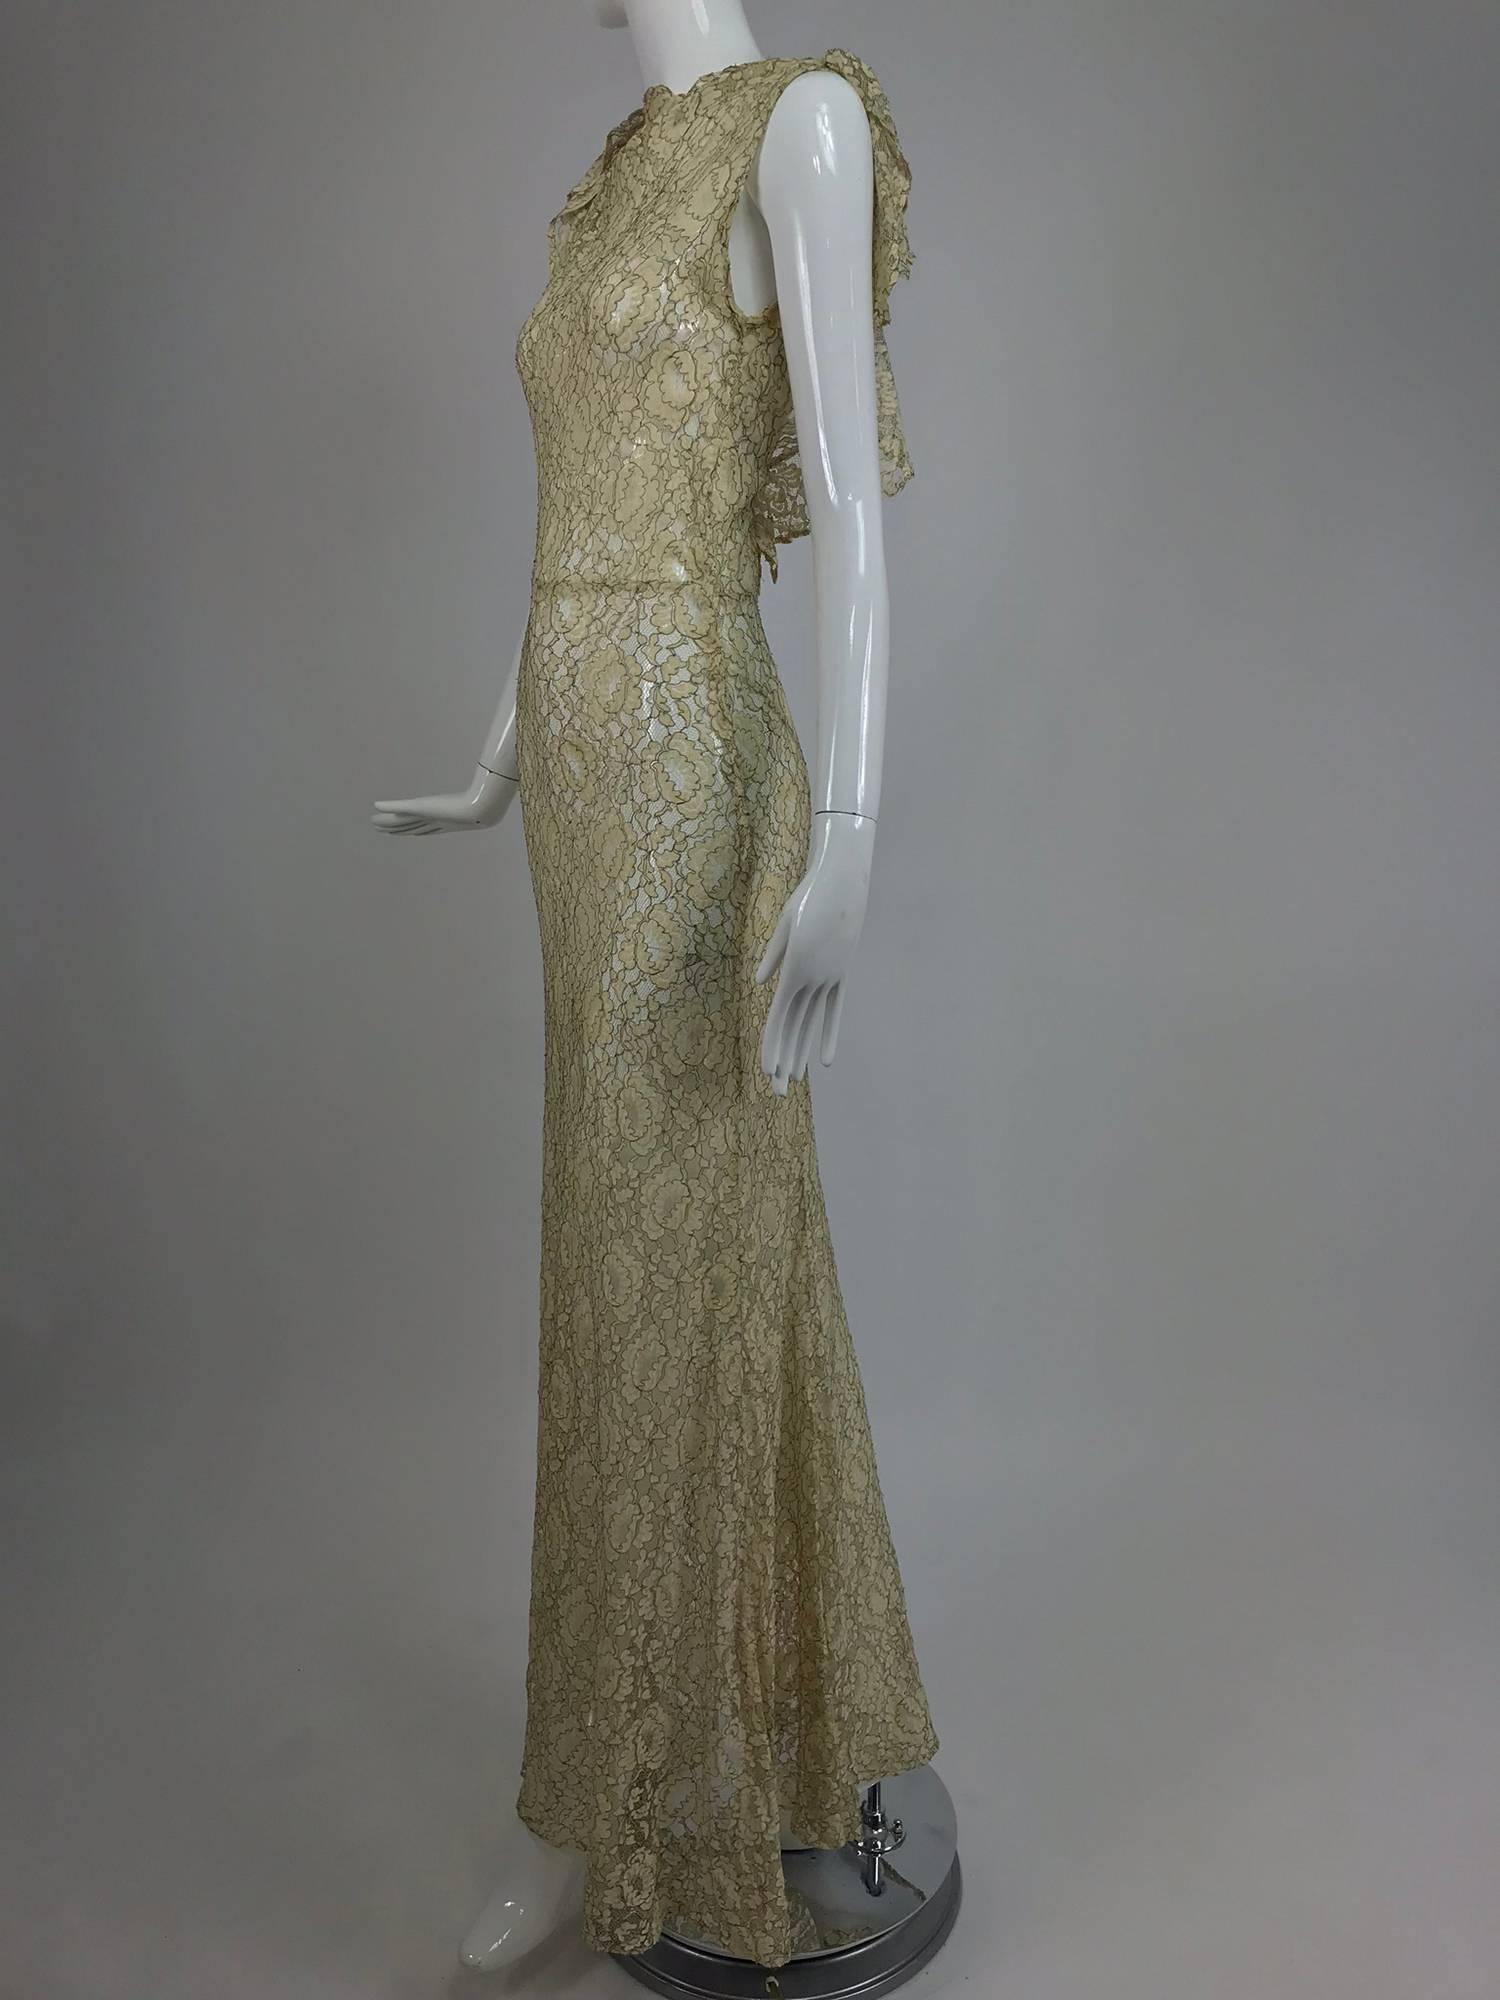 Women's 1930s Mixed Gold Metallic and Cream Lace Evening Dress